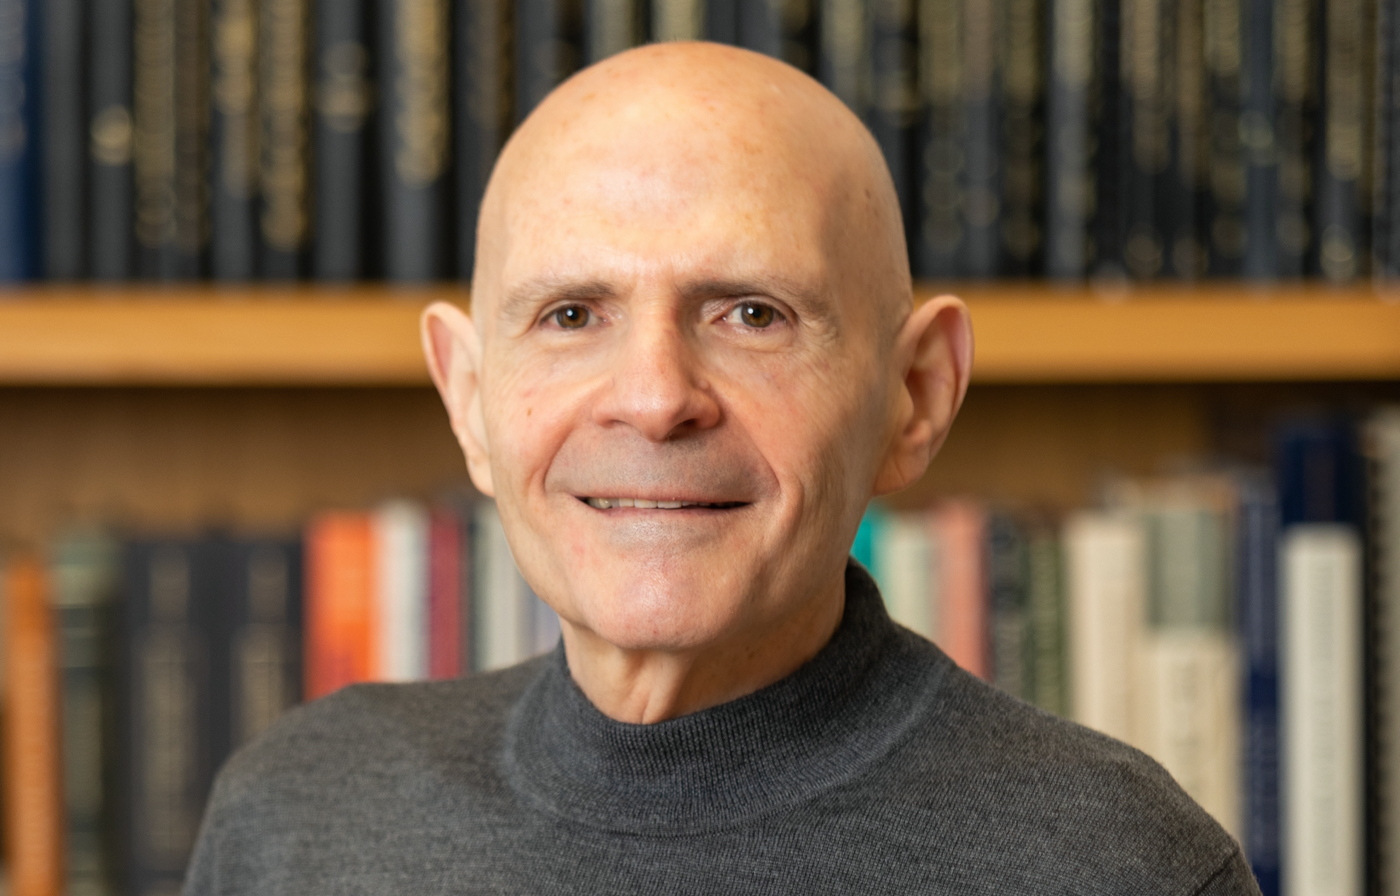 a bald older white man with a bookshelf behind him smiles at the camera